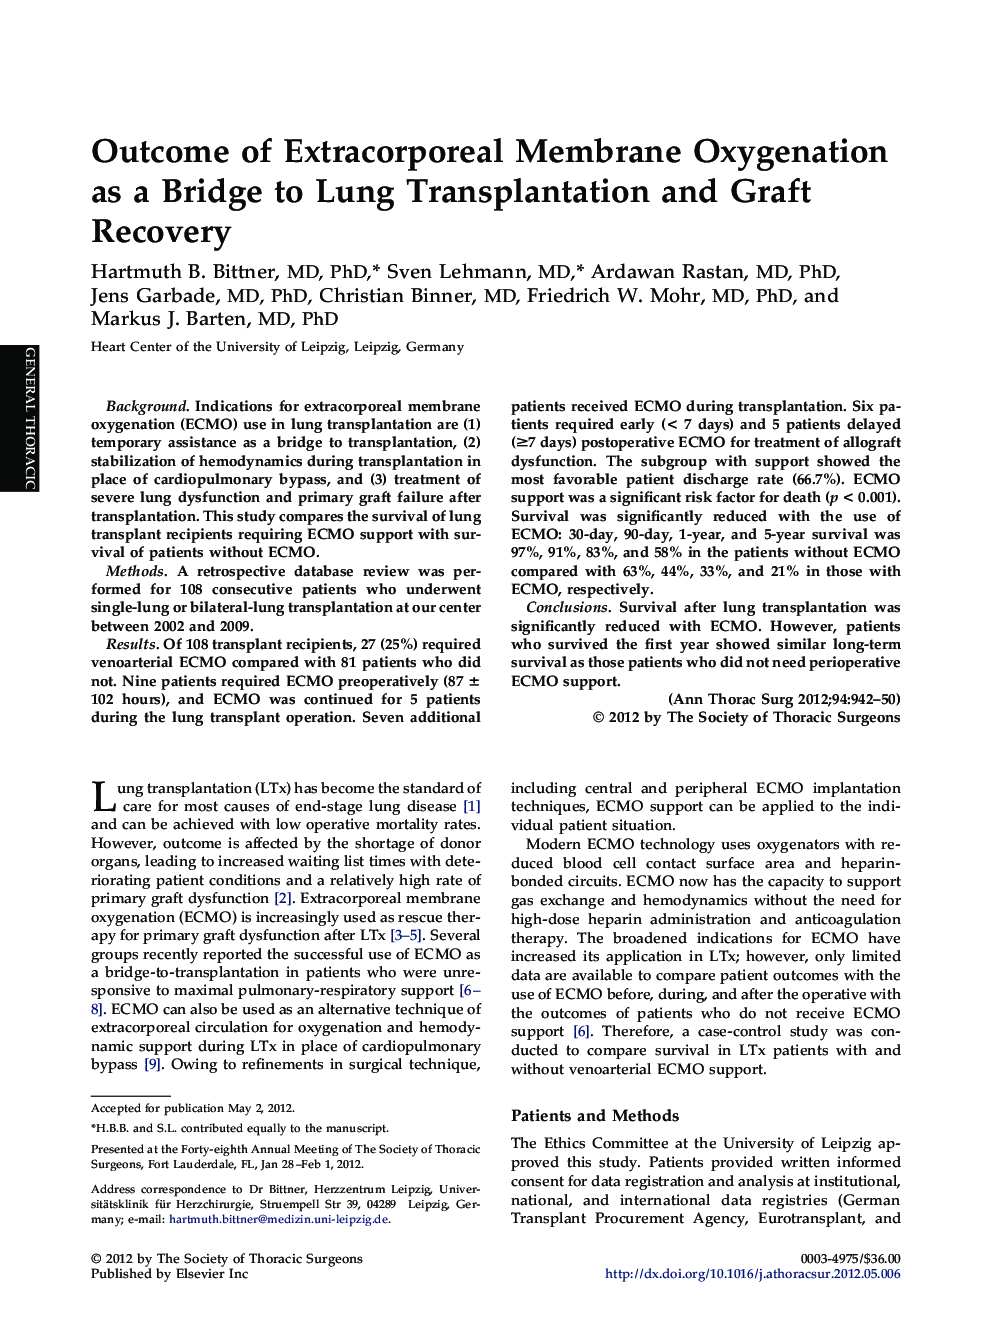 Outcome of Extracorporeal Membrane Oxygenation as a Bridge to Lung Transplantation and Graft Recovery